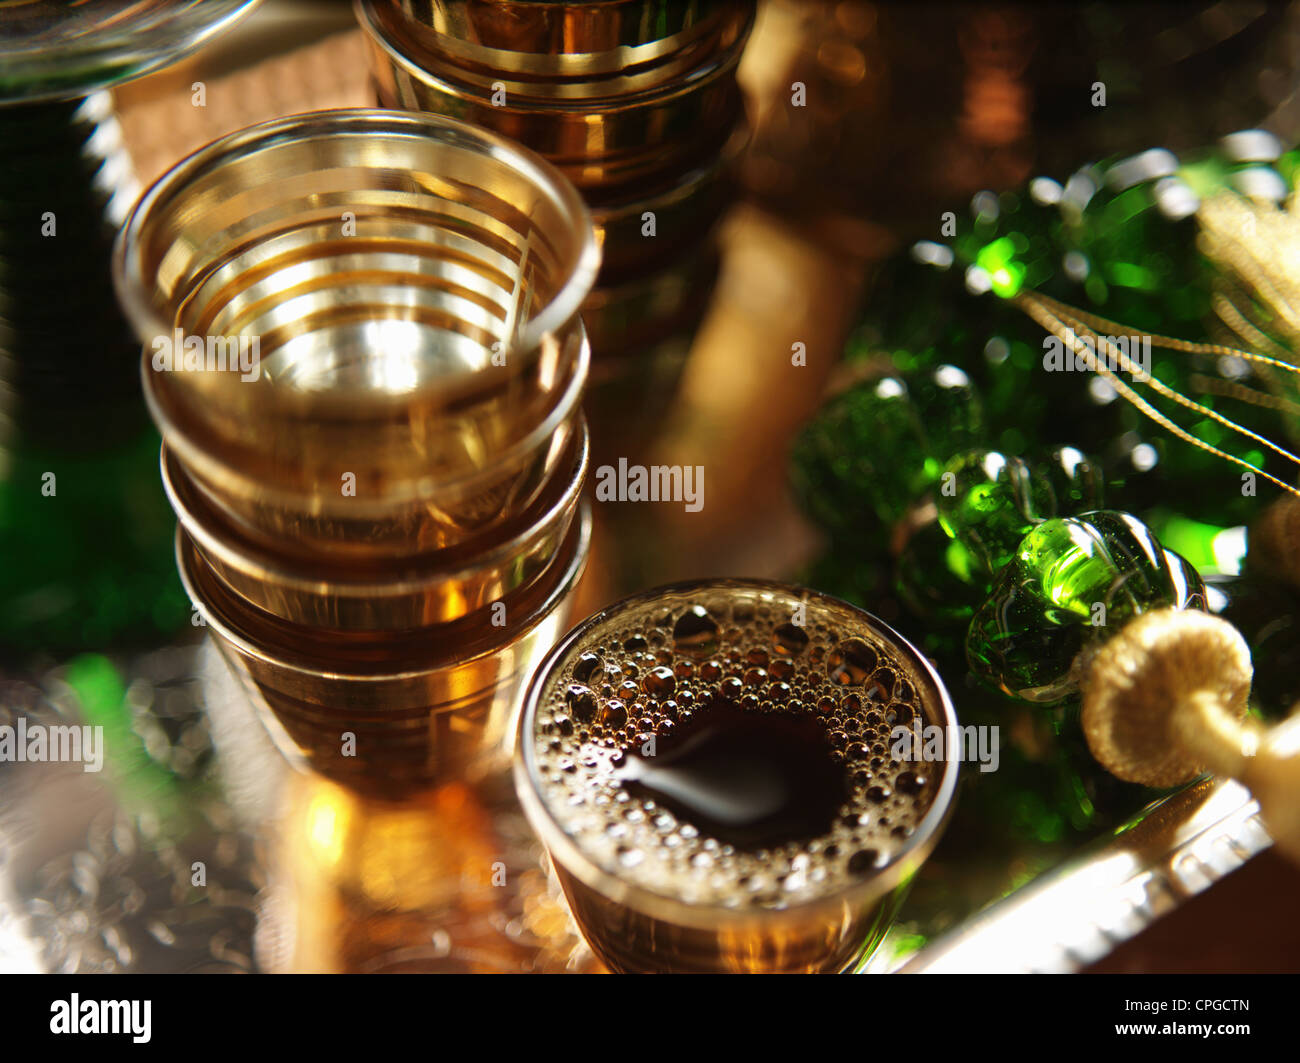 Cups of coffee in a tray. Stock Photo